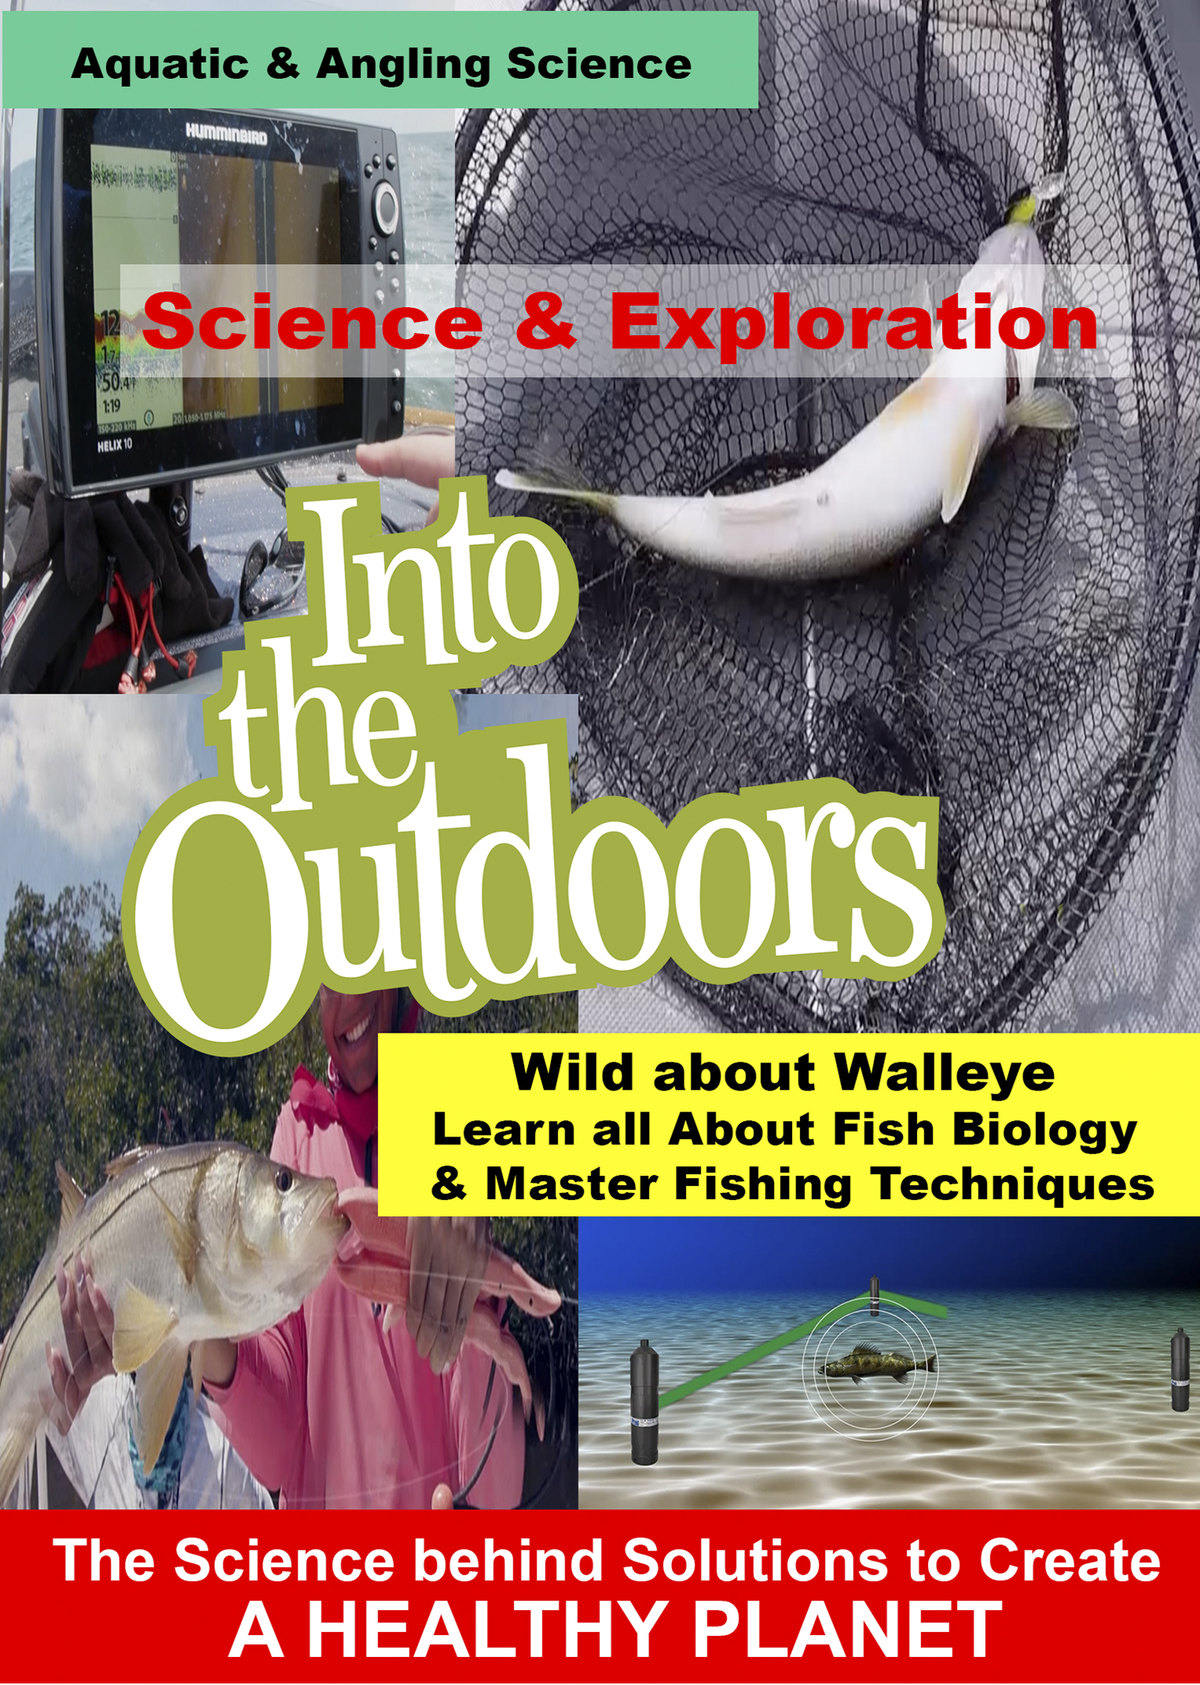 K5007 - Wild about Walleye - Learn all About Fish Biology, Master Fishing Techniques